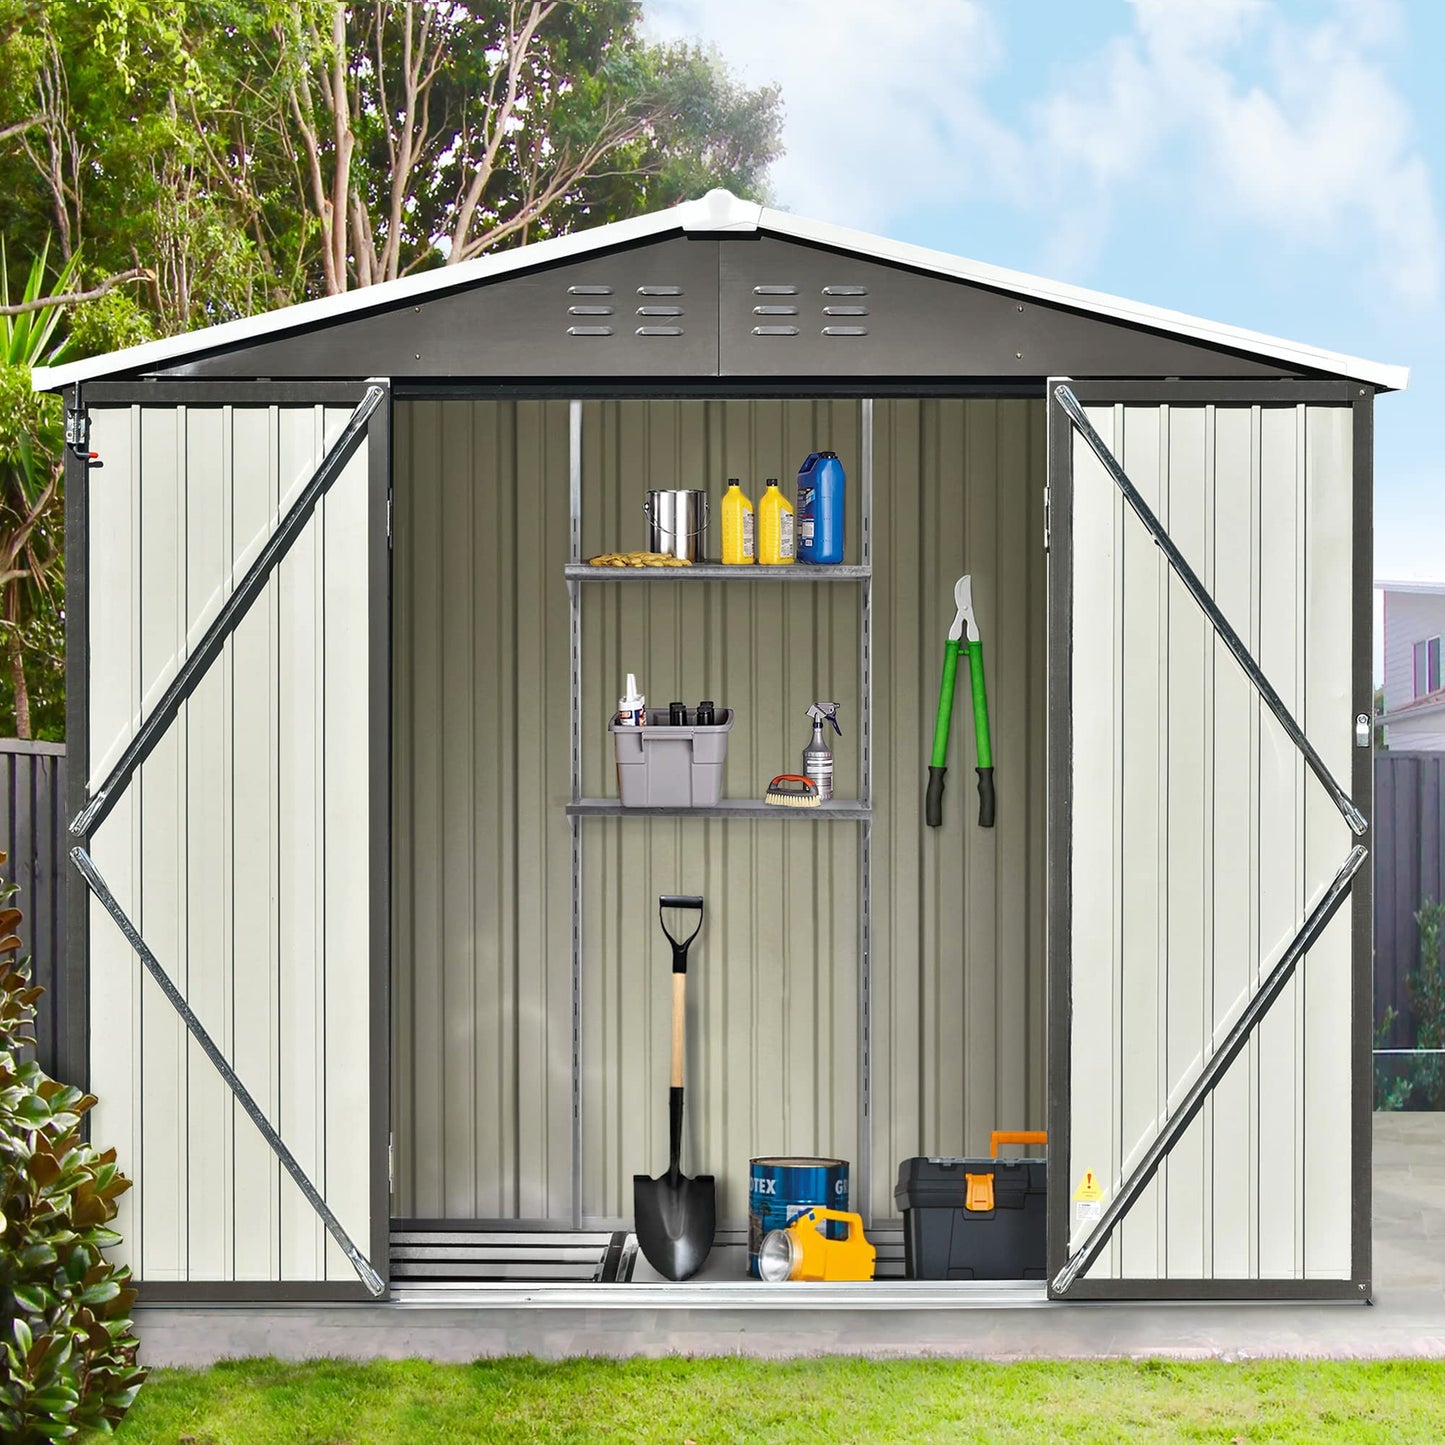 Evedy Metal Storage Shed Organizer,Patio 8x6ft Bike Shed Garden Shed,Storage Shed with Adjustable Shelf and Lockable Doors,Tool Cabinet with Vents and Foundation Frame for Backyard,Lawn,Garden,Gray Sheds & Outdoor Storage Gray